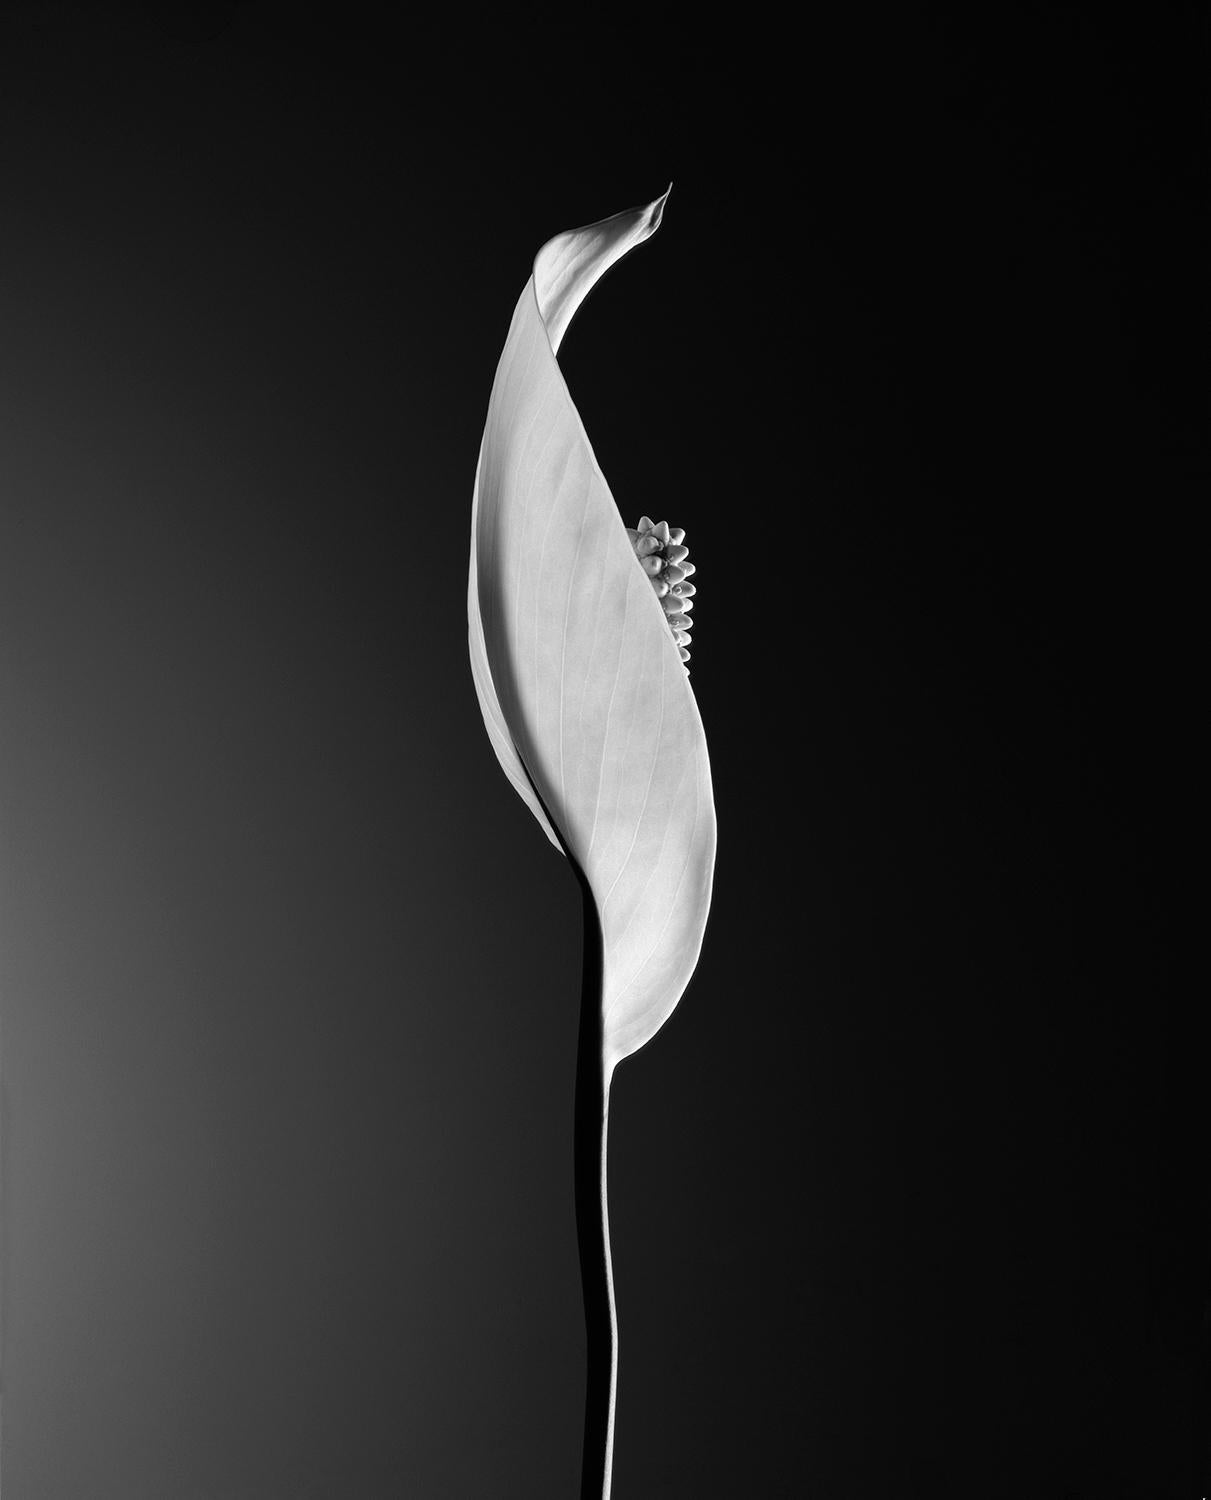 Edition of 25
signed and numbered by the artist

This picture of a flower "Calla" was shot on a polaroid film.

JJK is a pseudonym for one of the world's most successful photo artists.
In his series "Always in my mind", he depicts history, feelings,